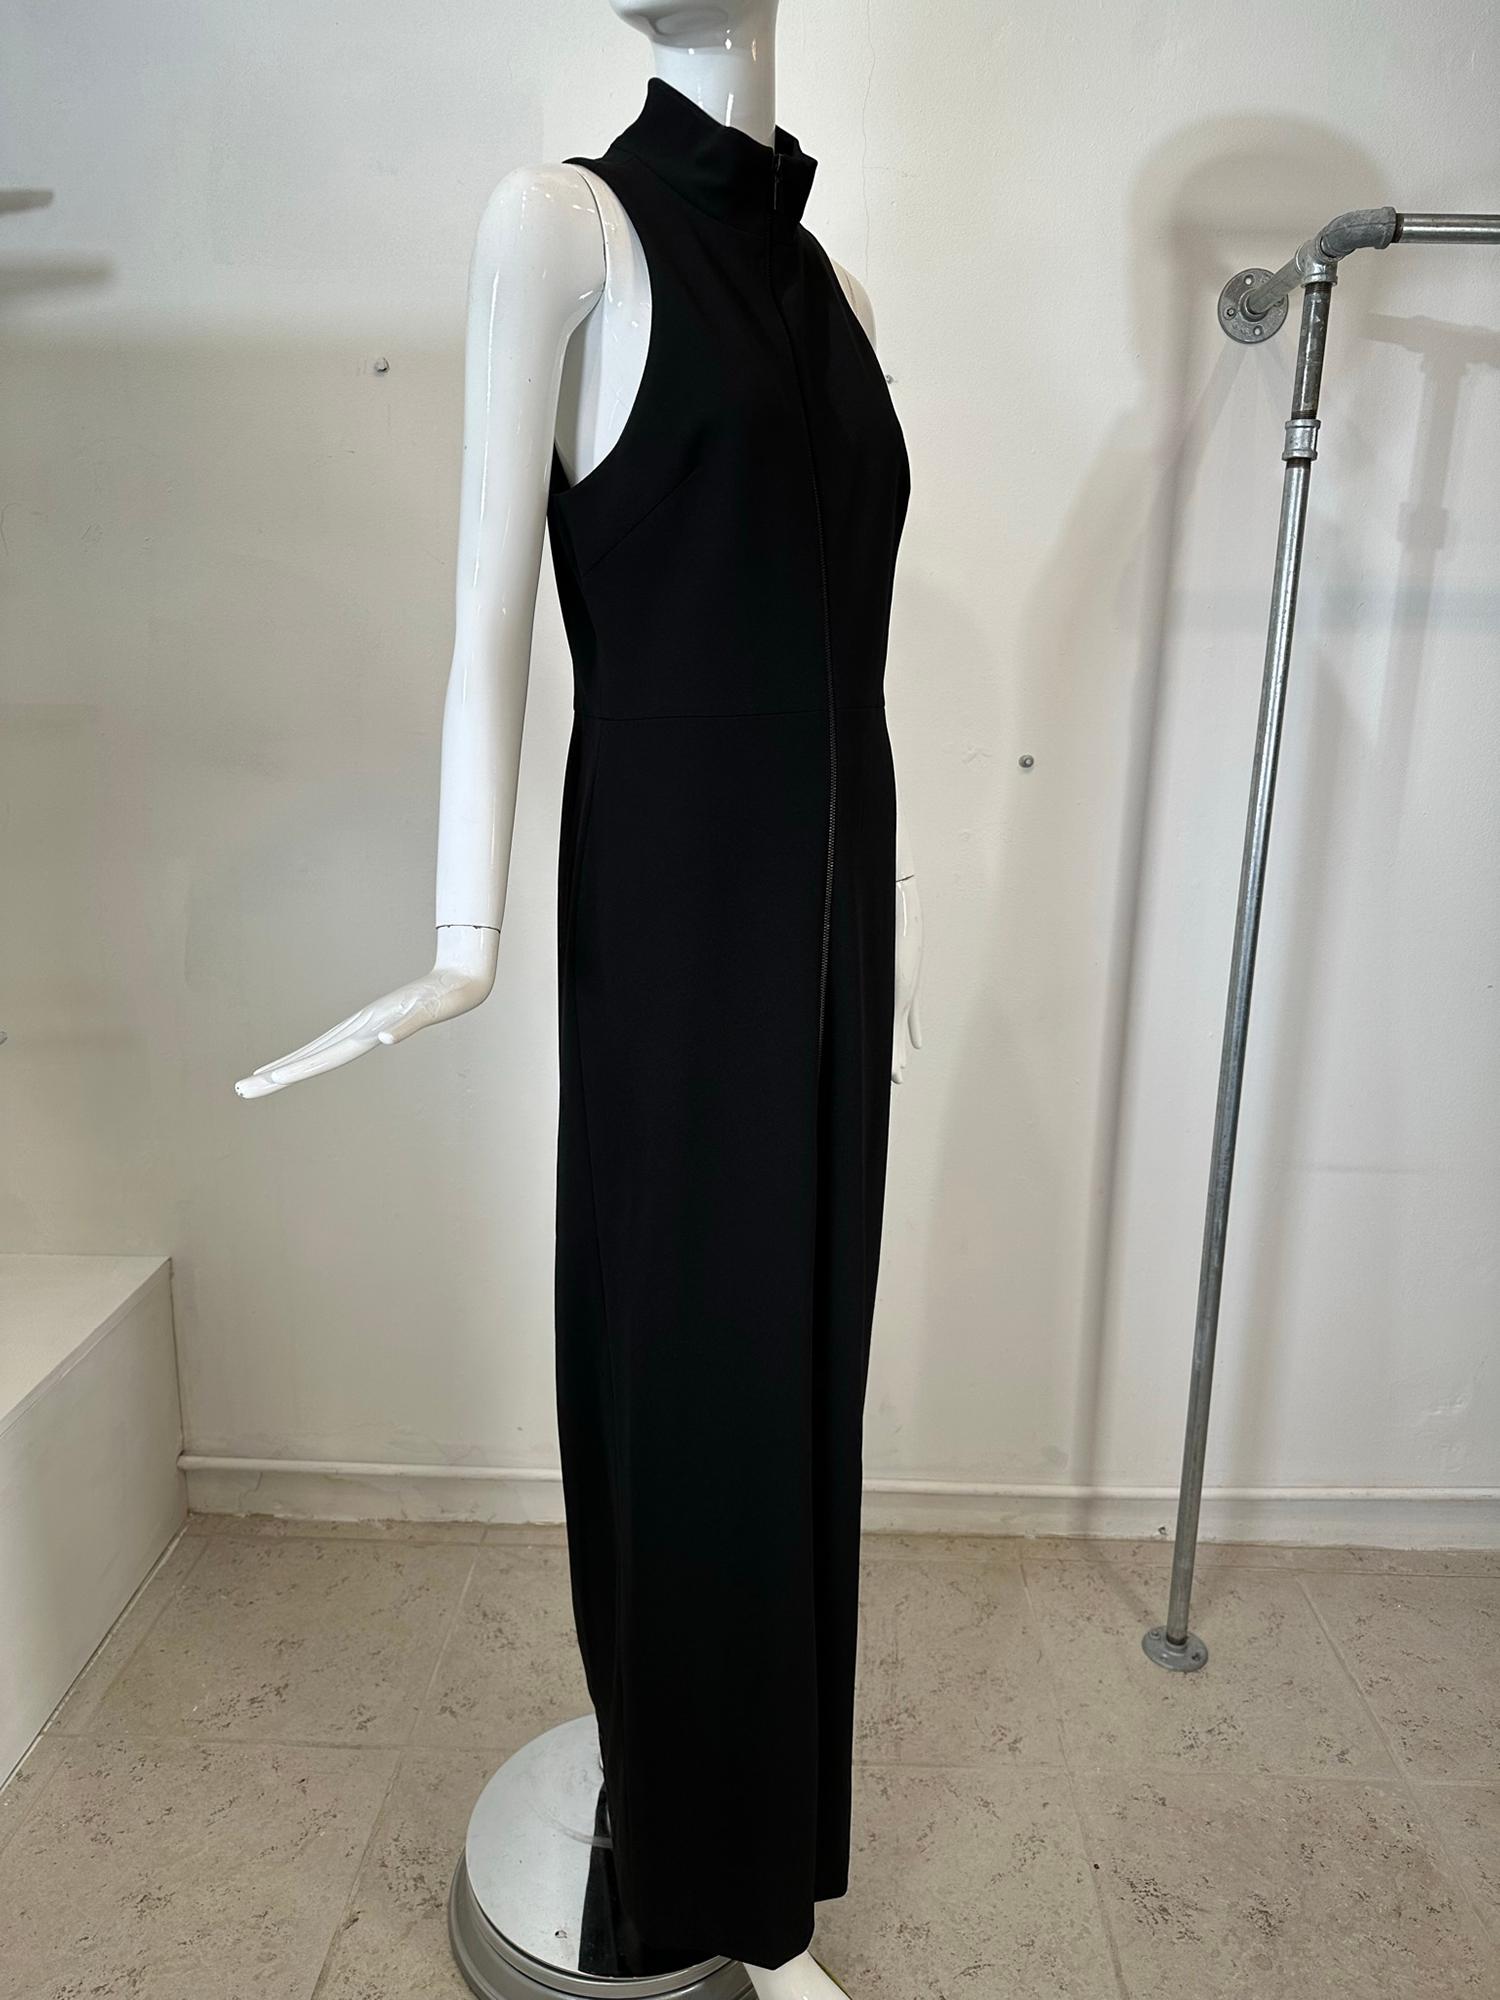 Vera Wang black knit jersey maxi dress with racer shoulders, band neck & zipper front. Fitted through the torso, the dress falls in an A line to the hem. There is a 28